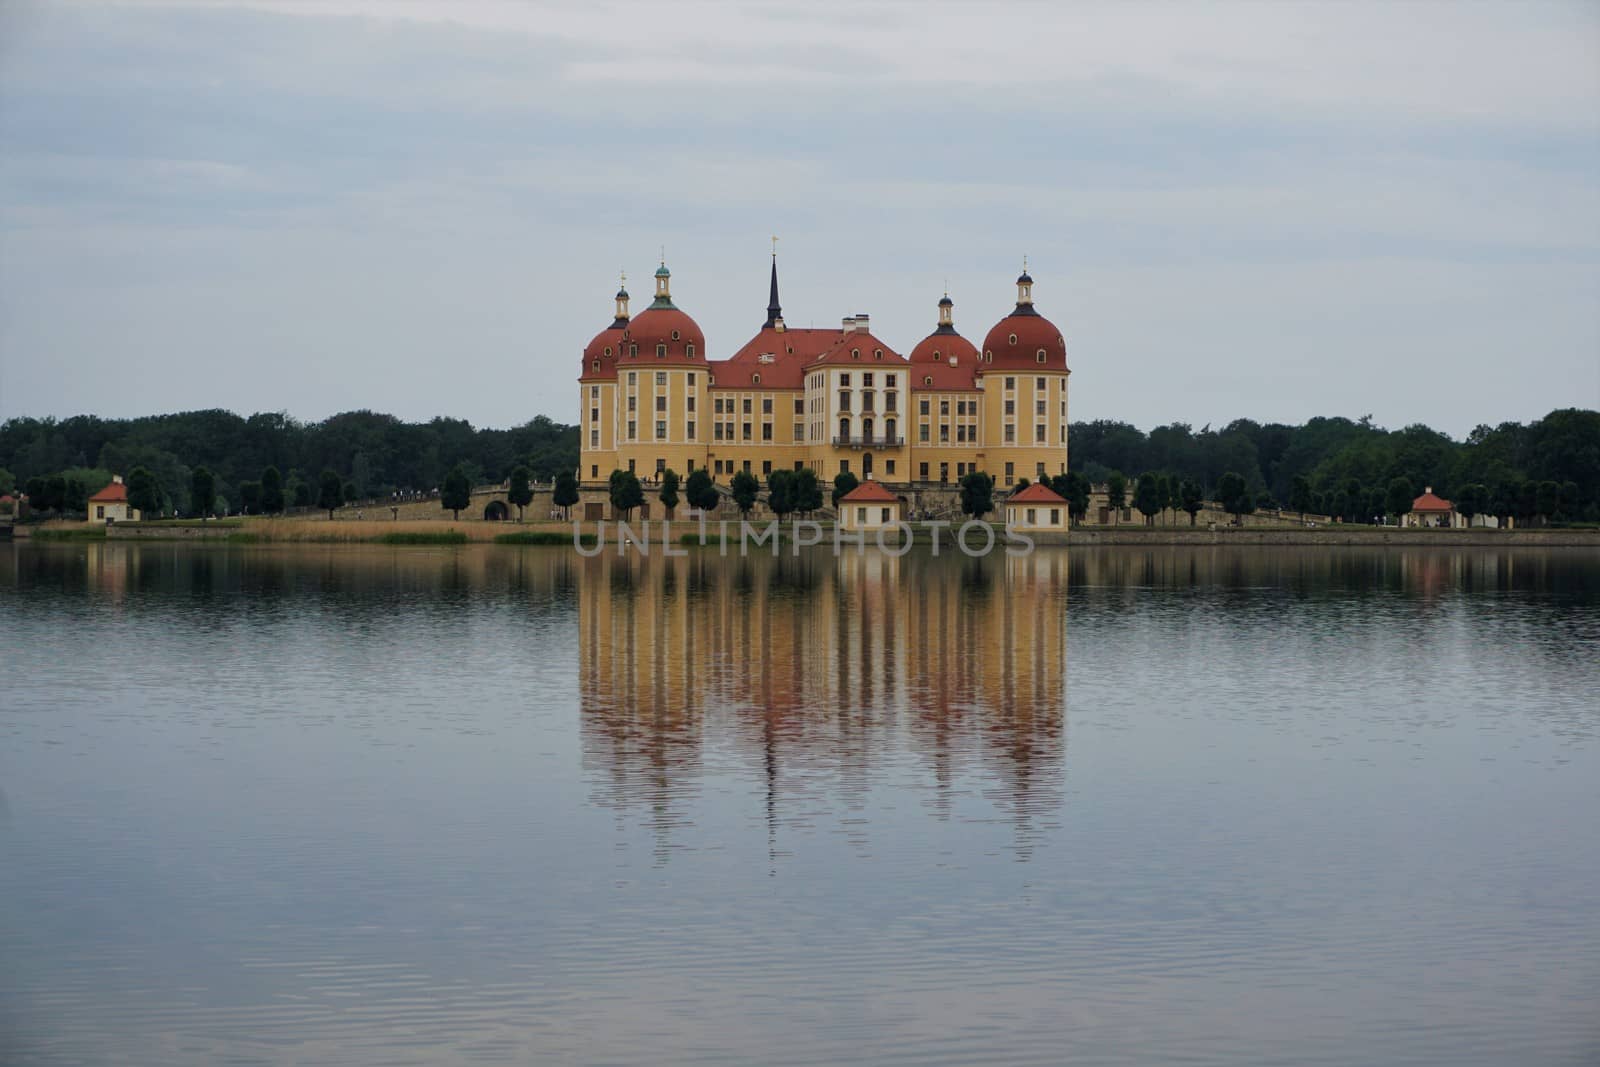 Moritzburg palace - reflections of the castle in the surrounding lake by pisces2386